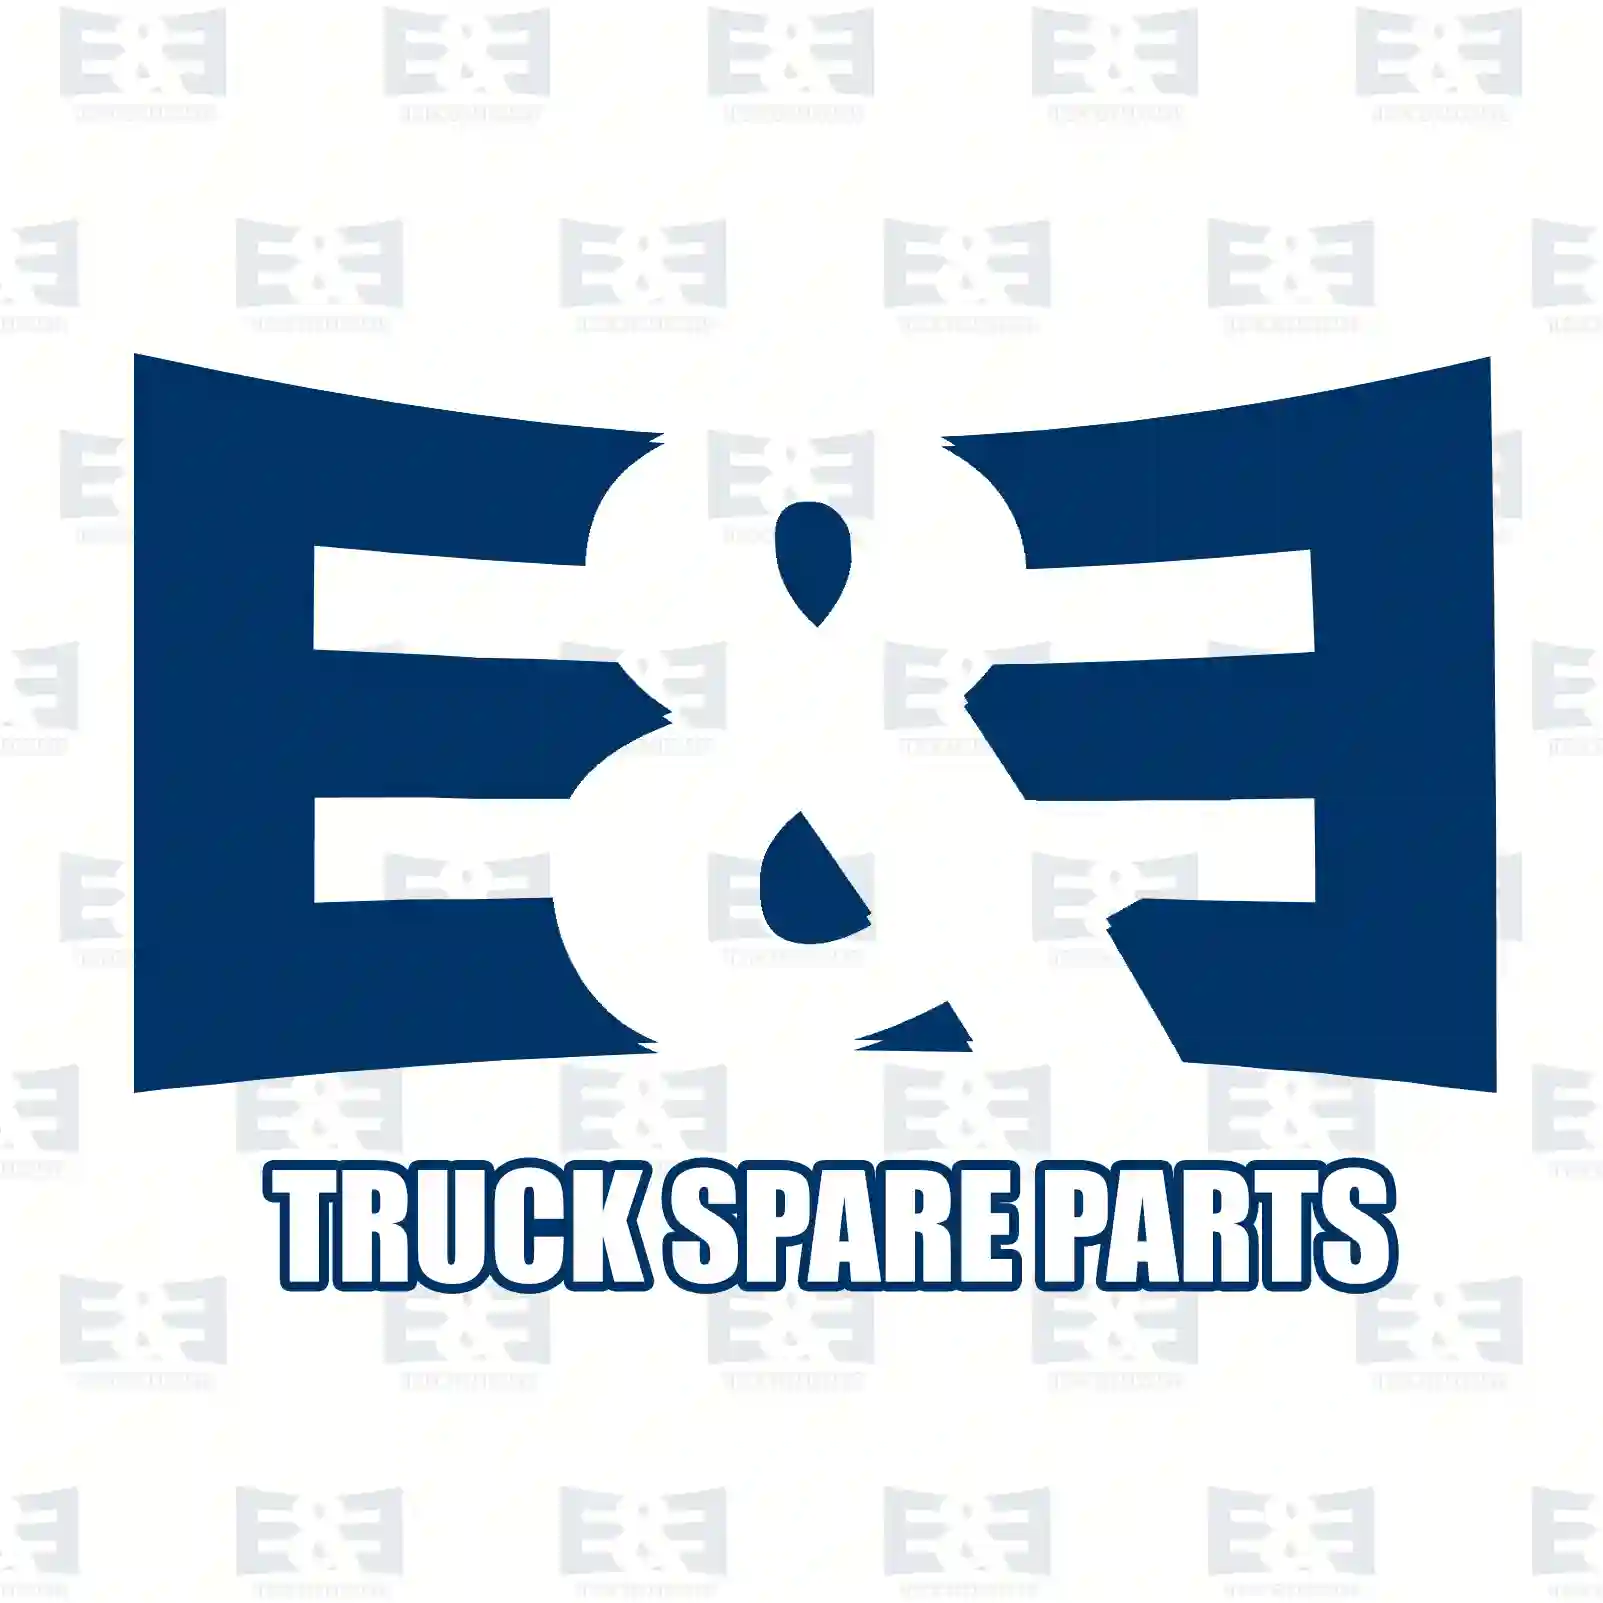  Disc brake pad kit, without accessories, with wear indicator || E&E Truck Spare Parts | Truck Spare Parts, Auotomotive Spare Parts